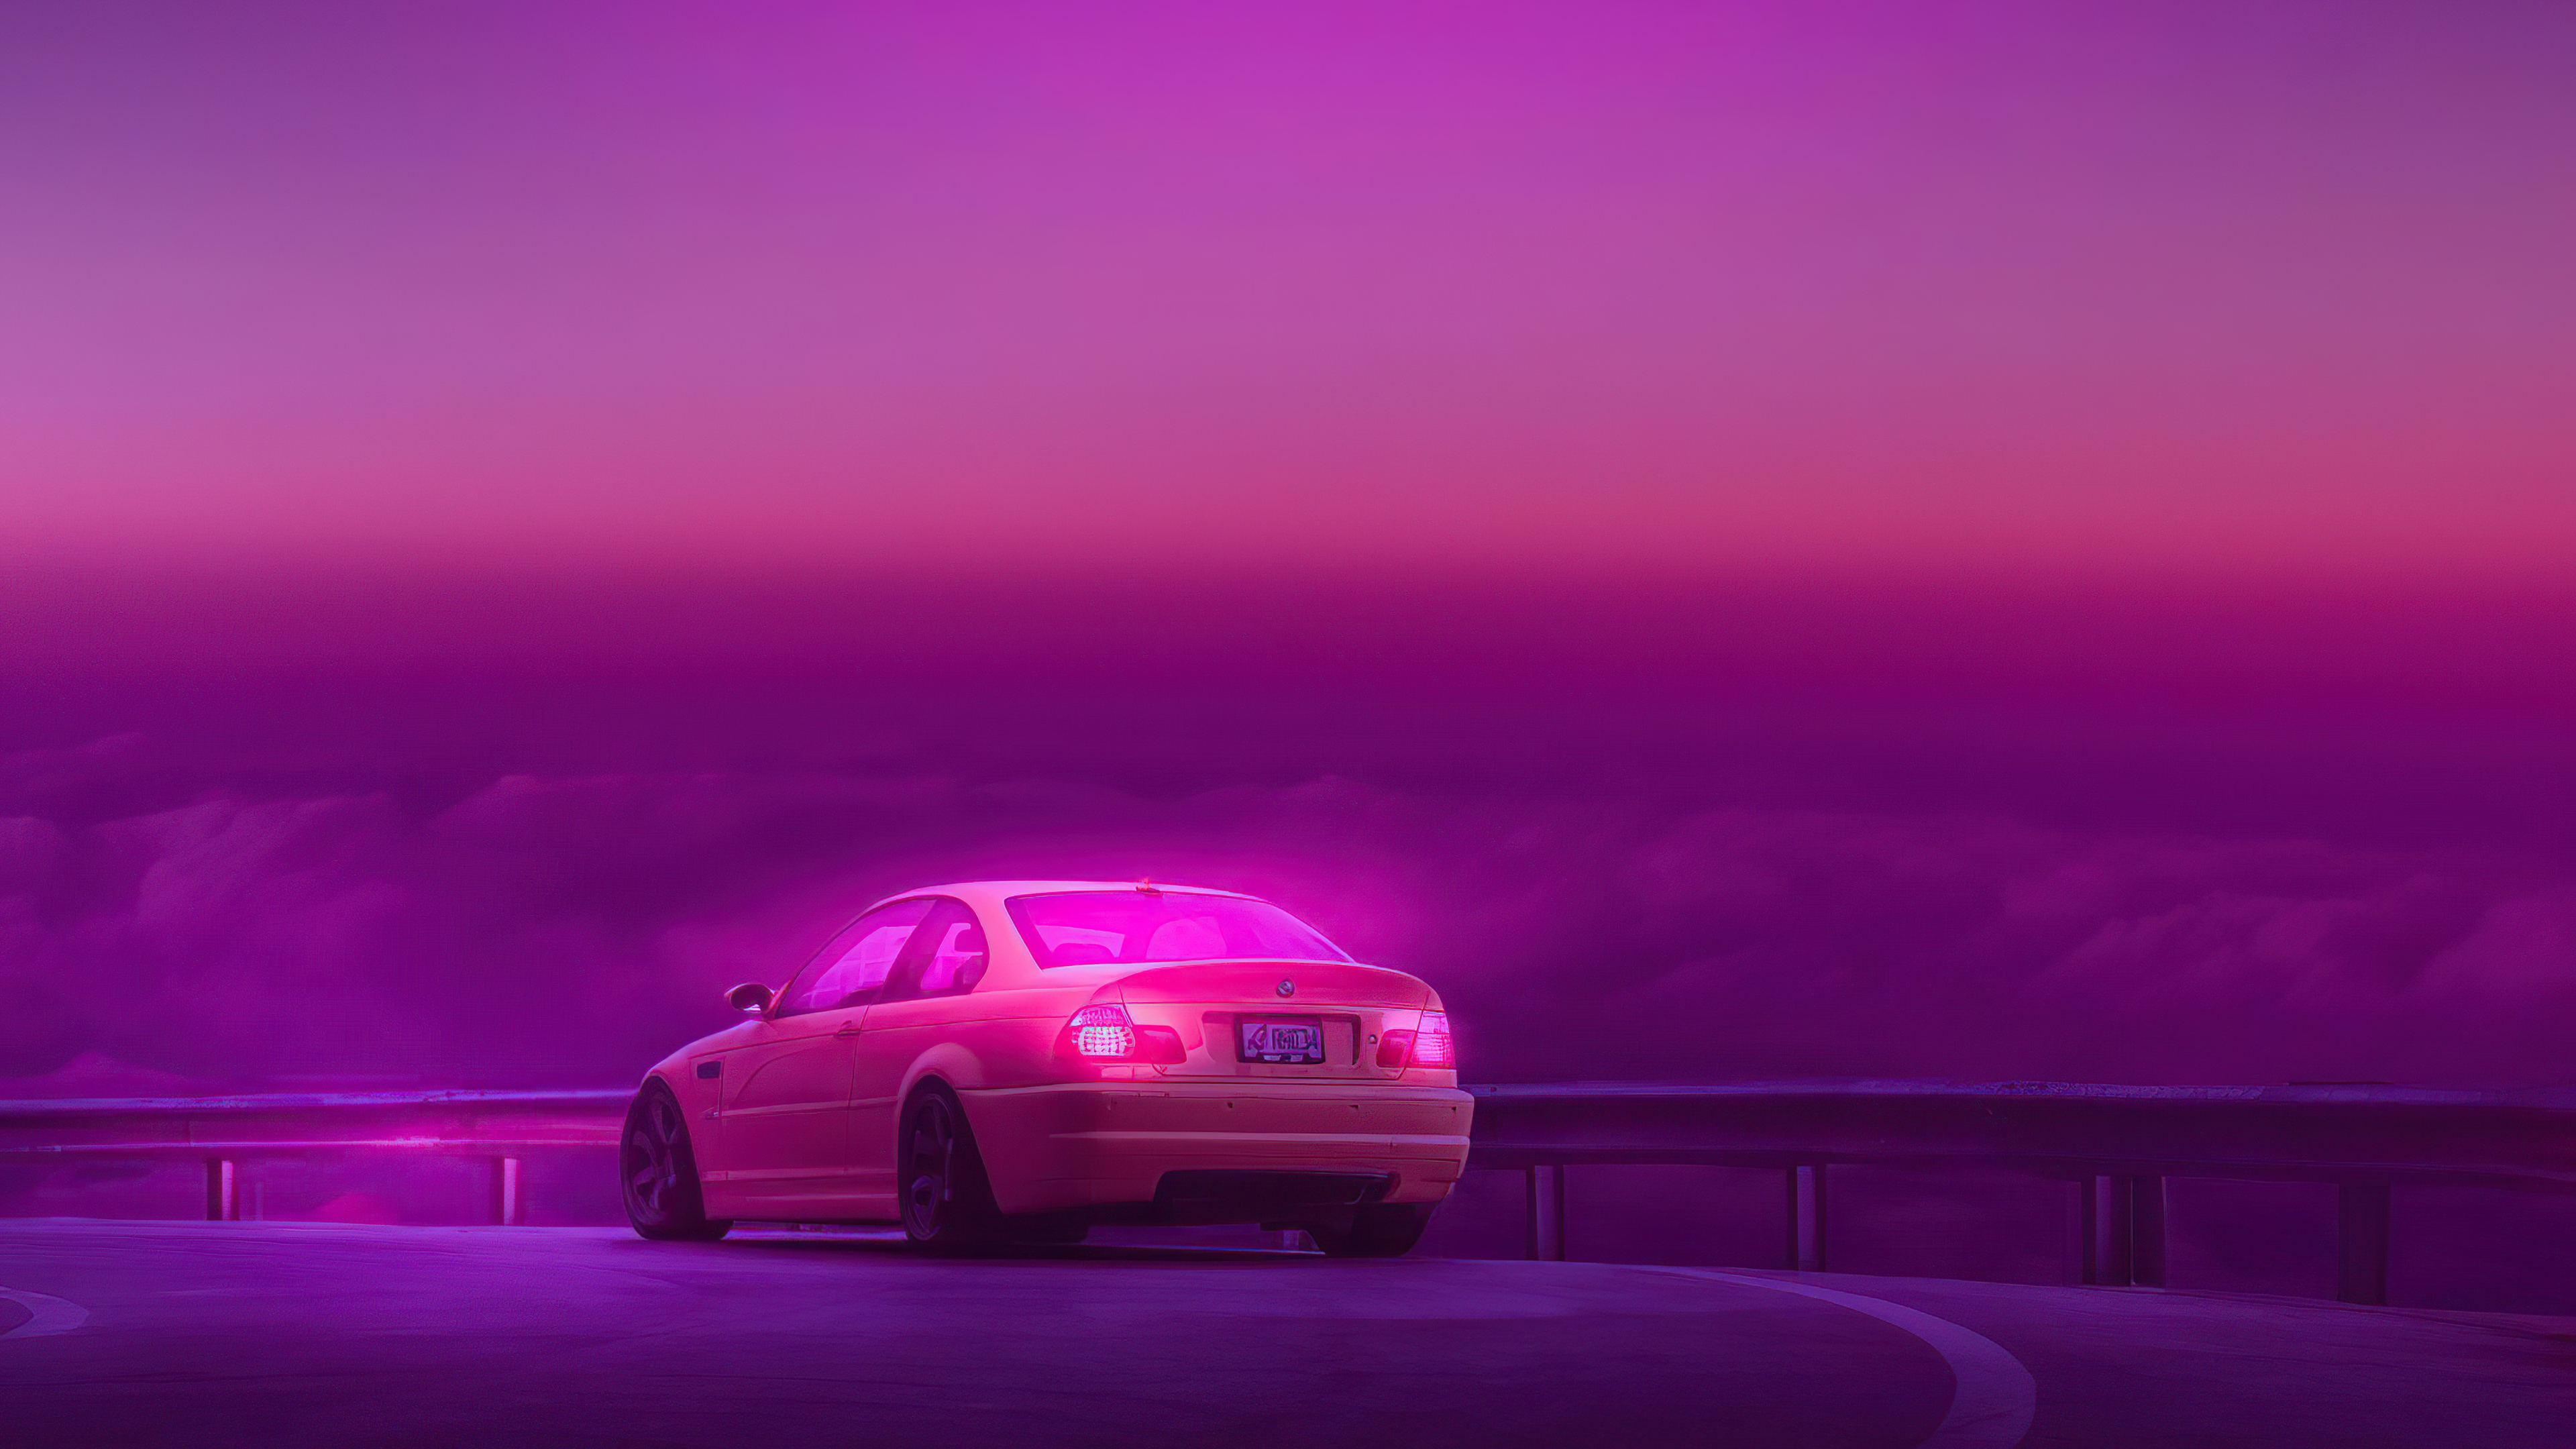 Outrun Style Car Moving On The Bridge Wallpapers